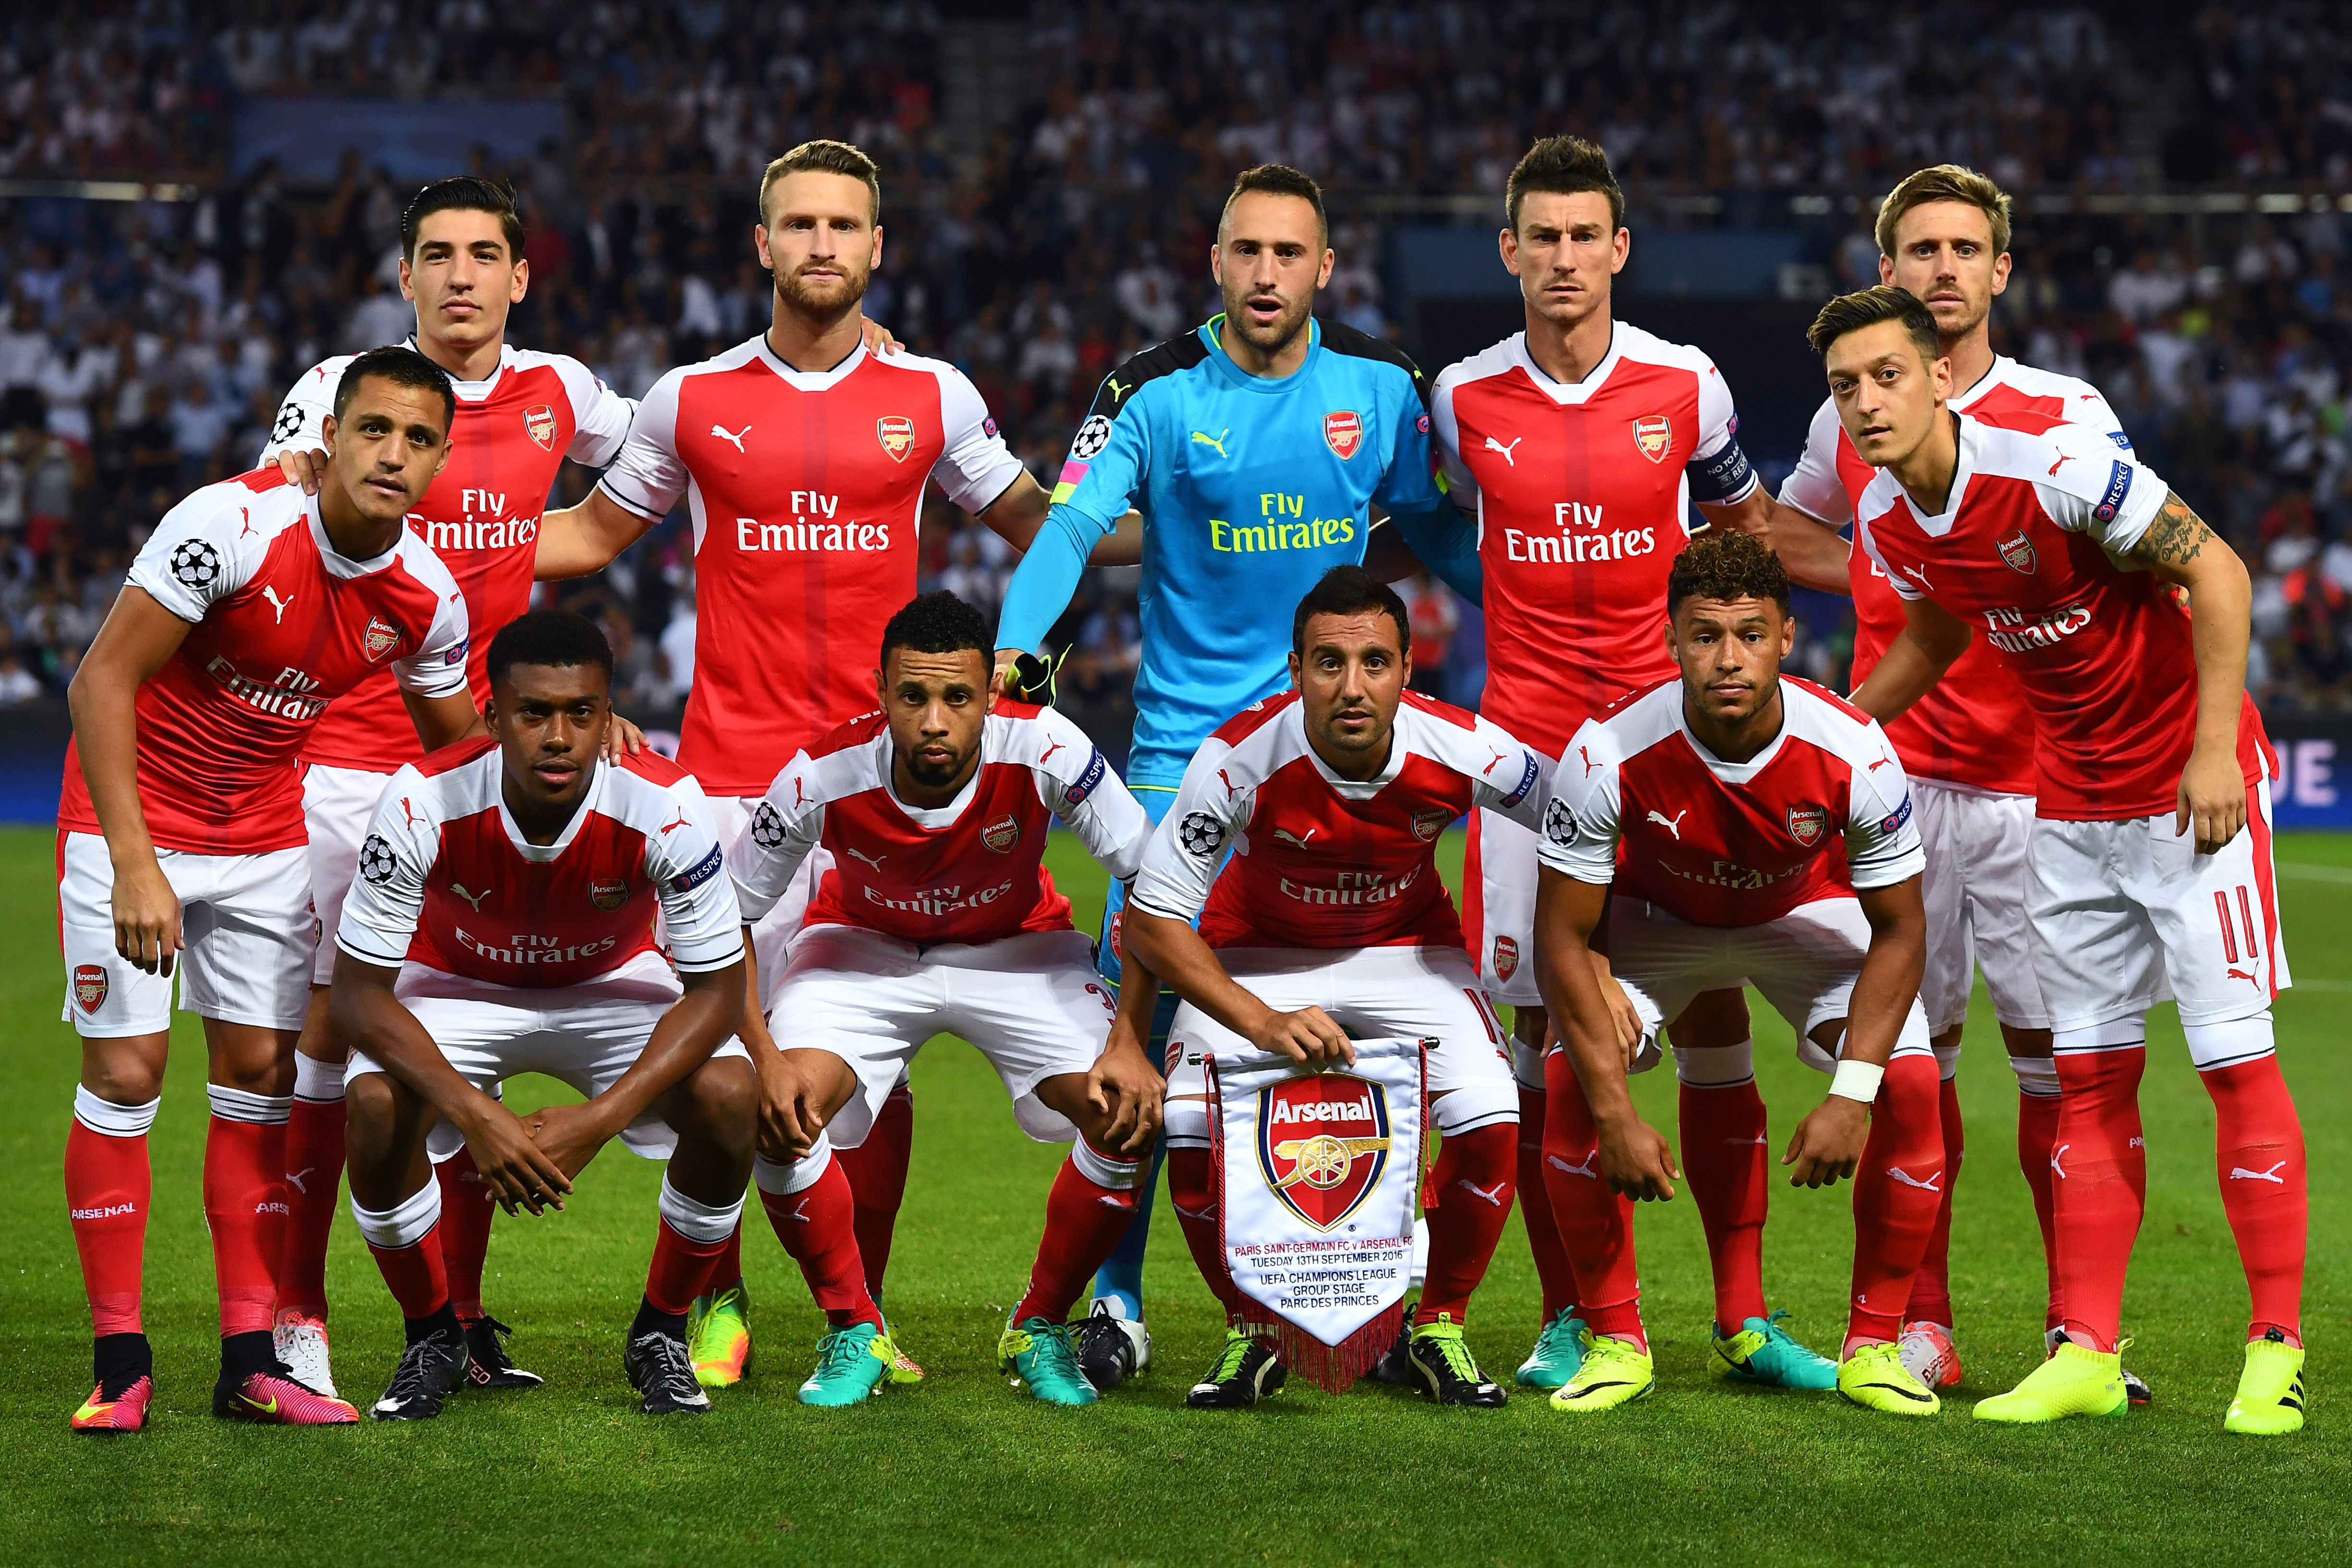 Arsenal's players pose prior to the UEFA Champions League Group A football match between Paris-Saint-Germain vs Arsenal FC, on September 13, 2016 at the Parc des Princes stadium in Paris.  AFP PHOTO / FRANCK FIFE / AFP / FRANCK FIFE        (Photo credit should read FRANCK FIFE/AFP/Getty Images)